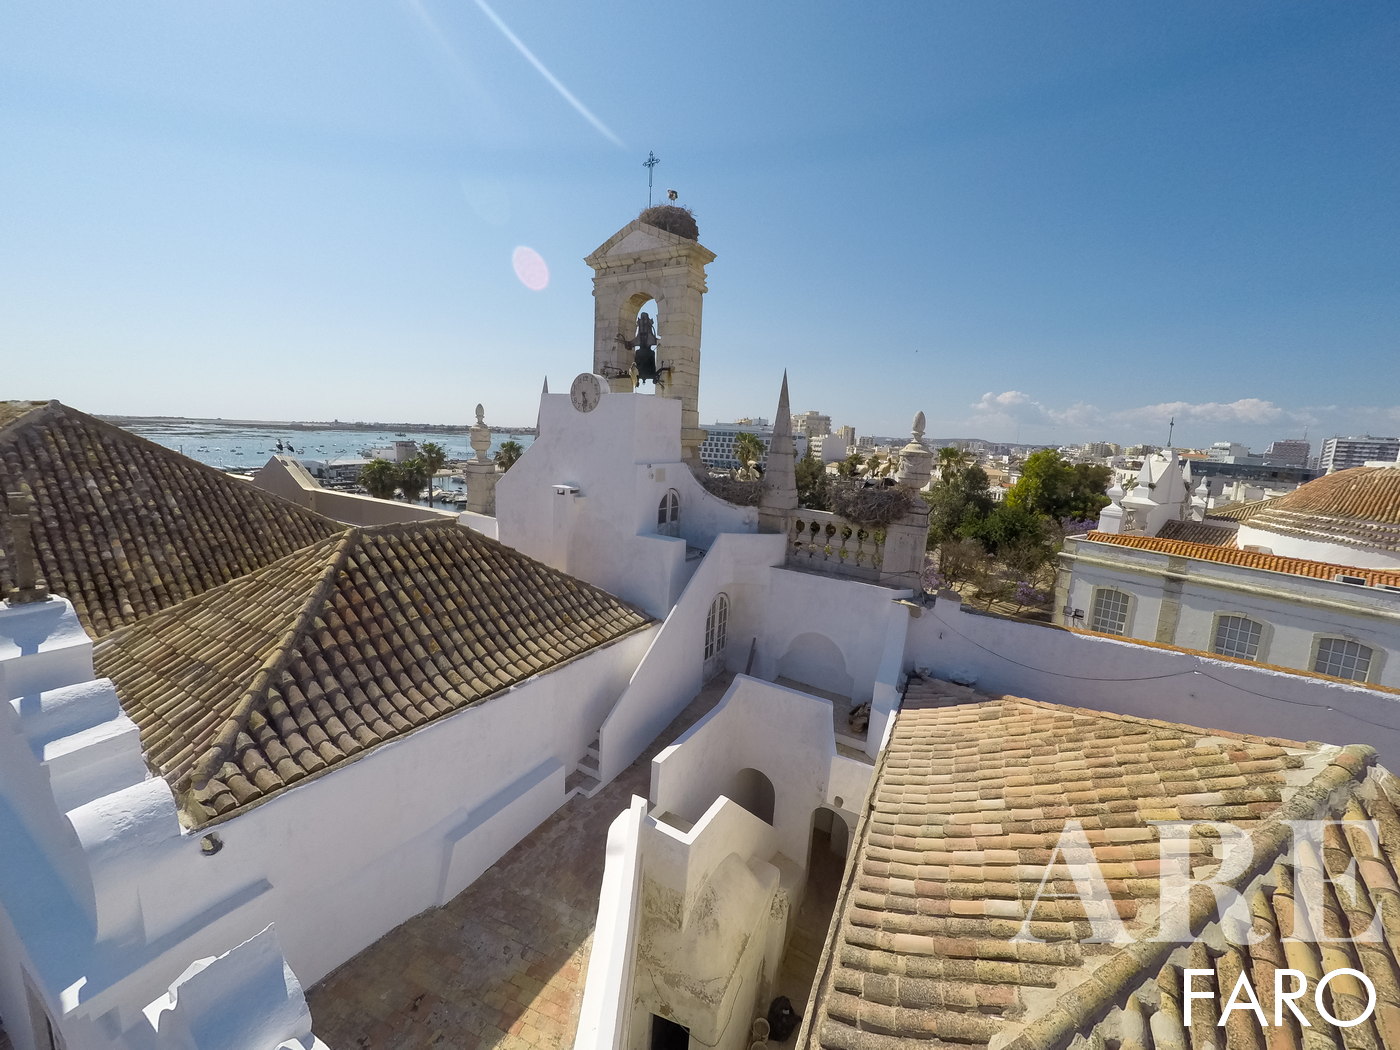 Aerial view of the charming, terracotta-tiled rooftops of Faro's old town, showcasing the picturesque and historical urban landscape of this Algarvian gem.